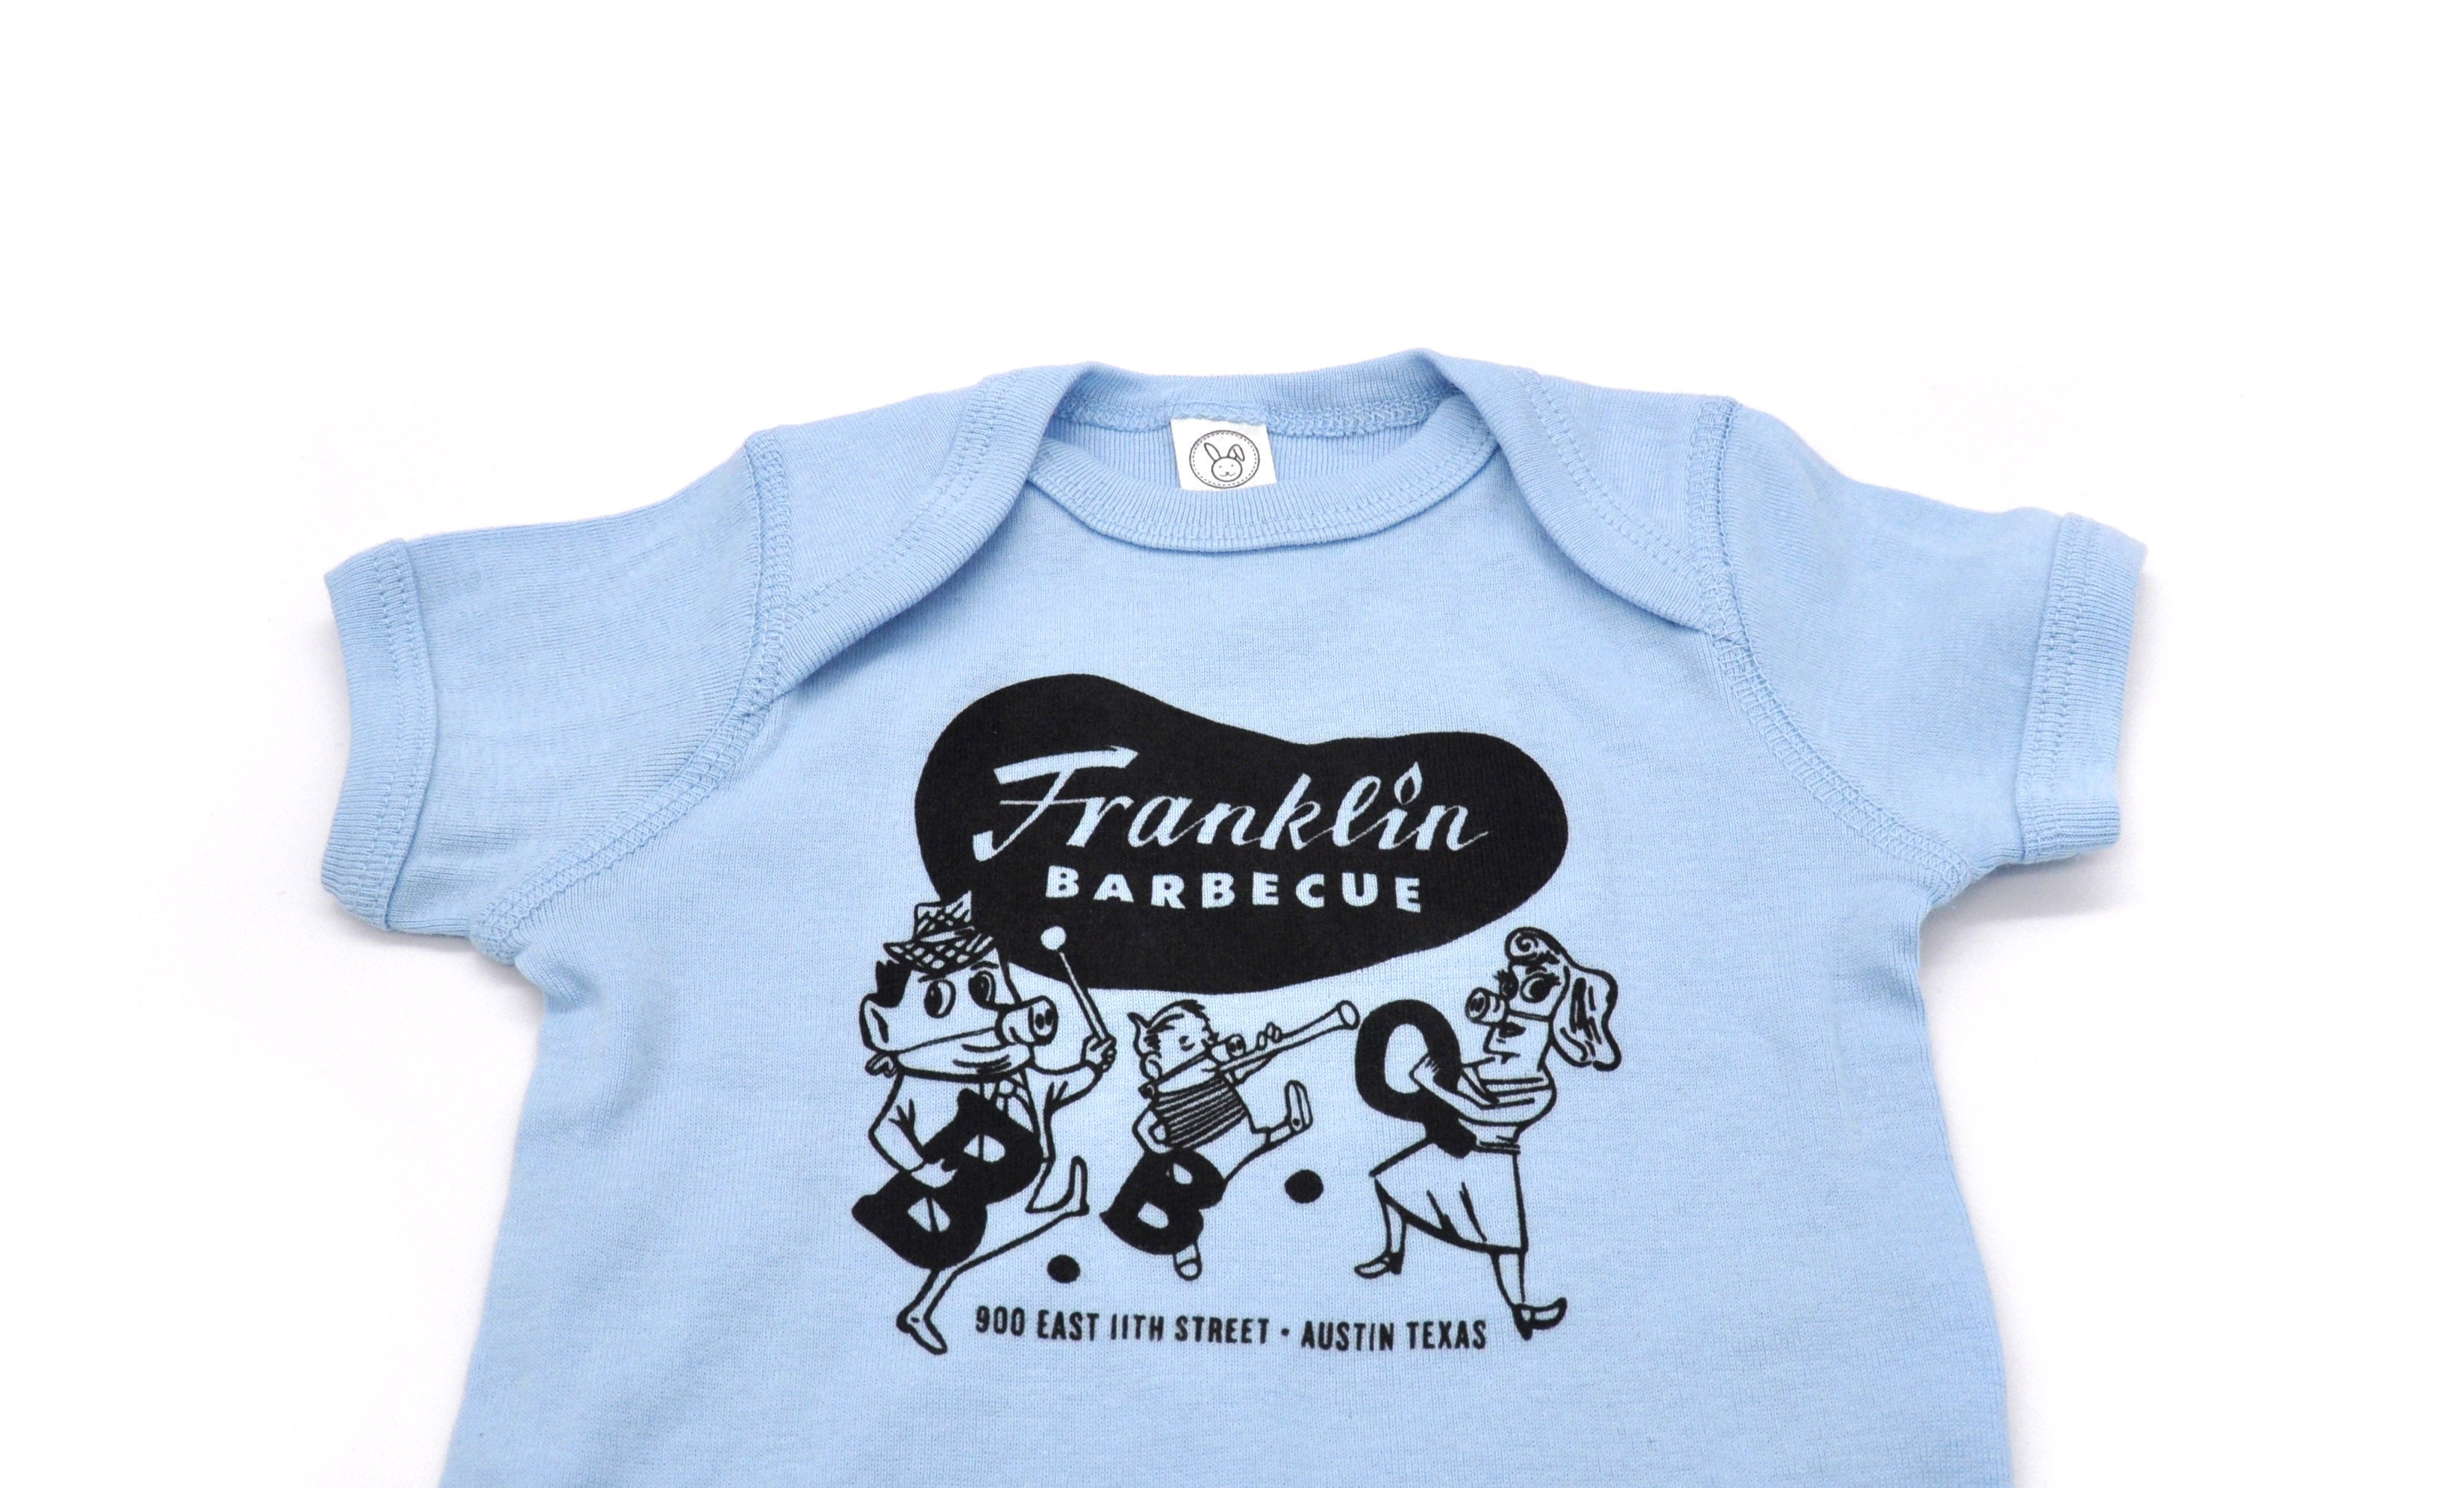 Baby Blue onesie with Franklin Barbecue bean Logo in black and logo of dancing family holding the letters B-B-Q while wearing pig-nose masks also in black. Below the dancing family is the address of Franklin Barbecue also in black.